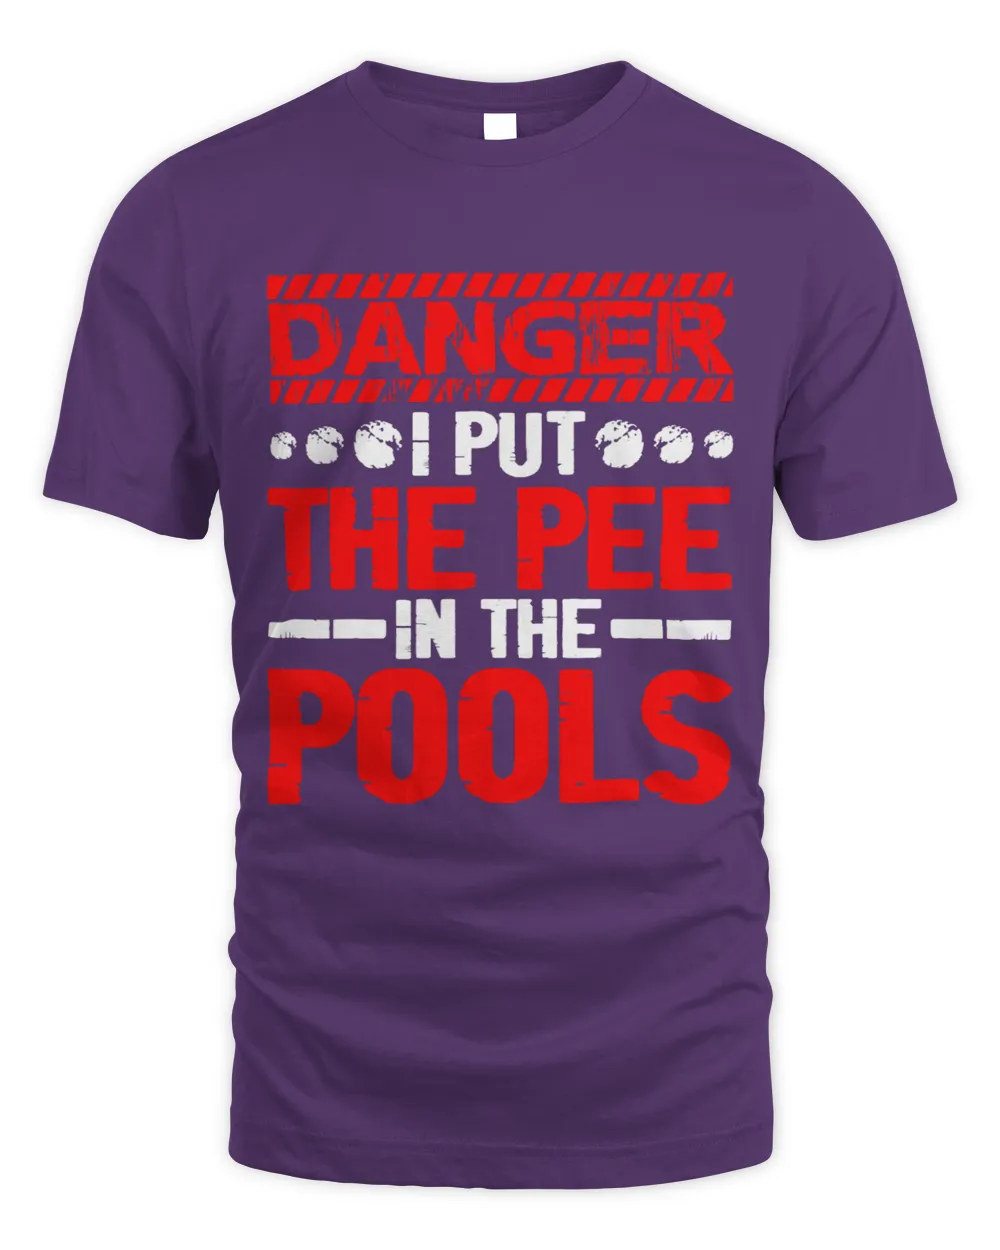 Danger I Put The Pee In The Pools